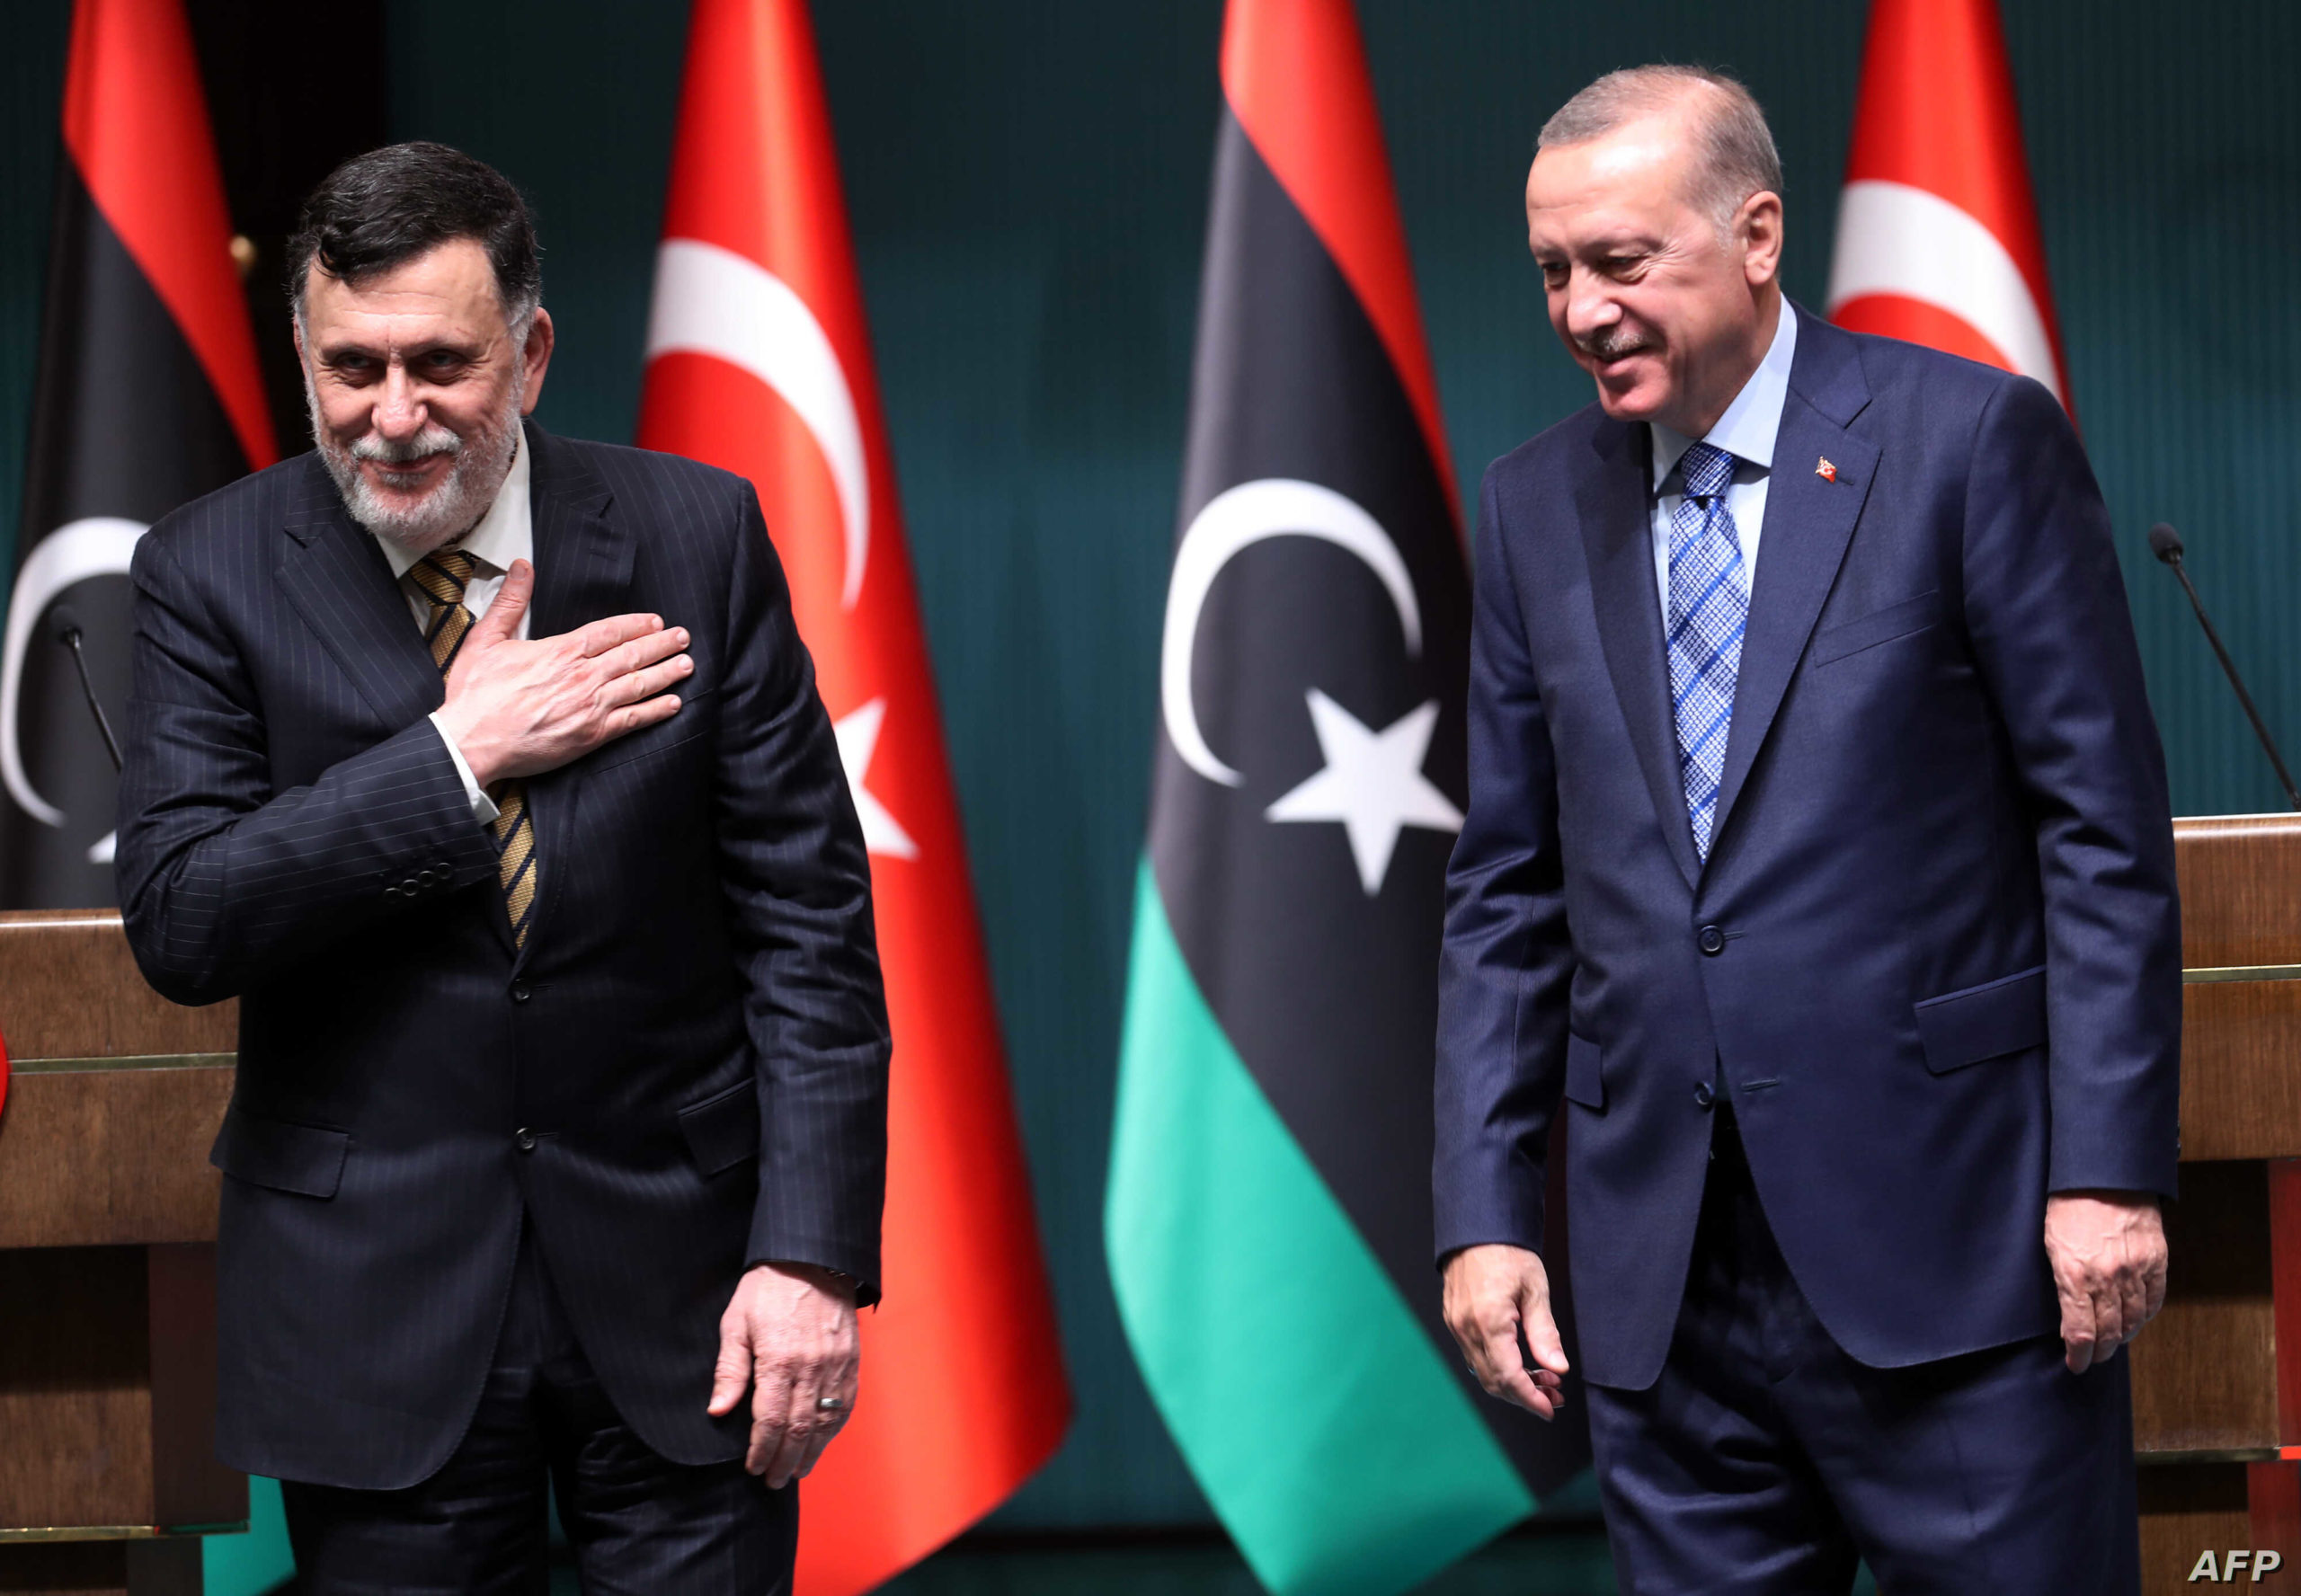 Turkish President Recep Tayyip Erdogan (R) and Libyan Prime Minister Fayez al-Sarraj hold a joint press conference at the Presidential Complex in Ankara on June 4, 2020.